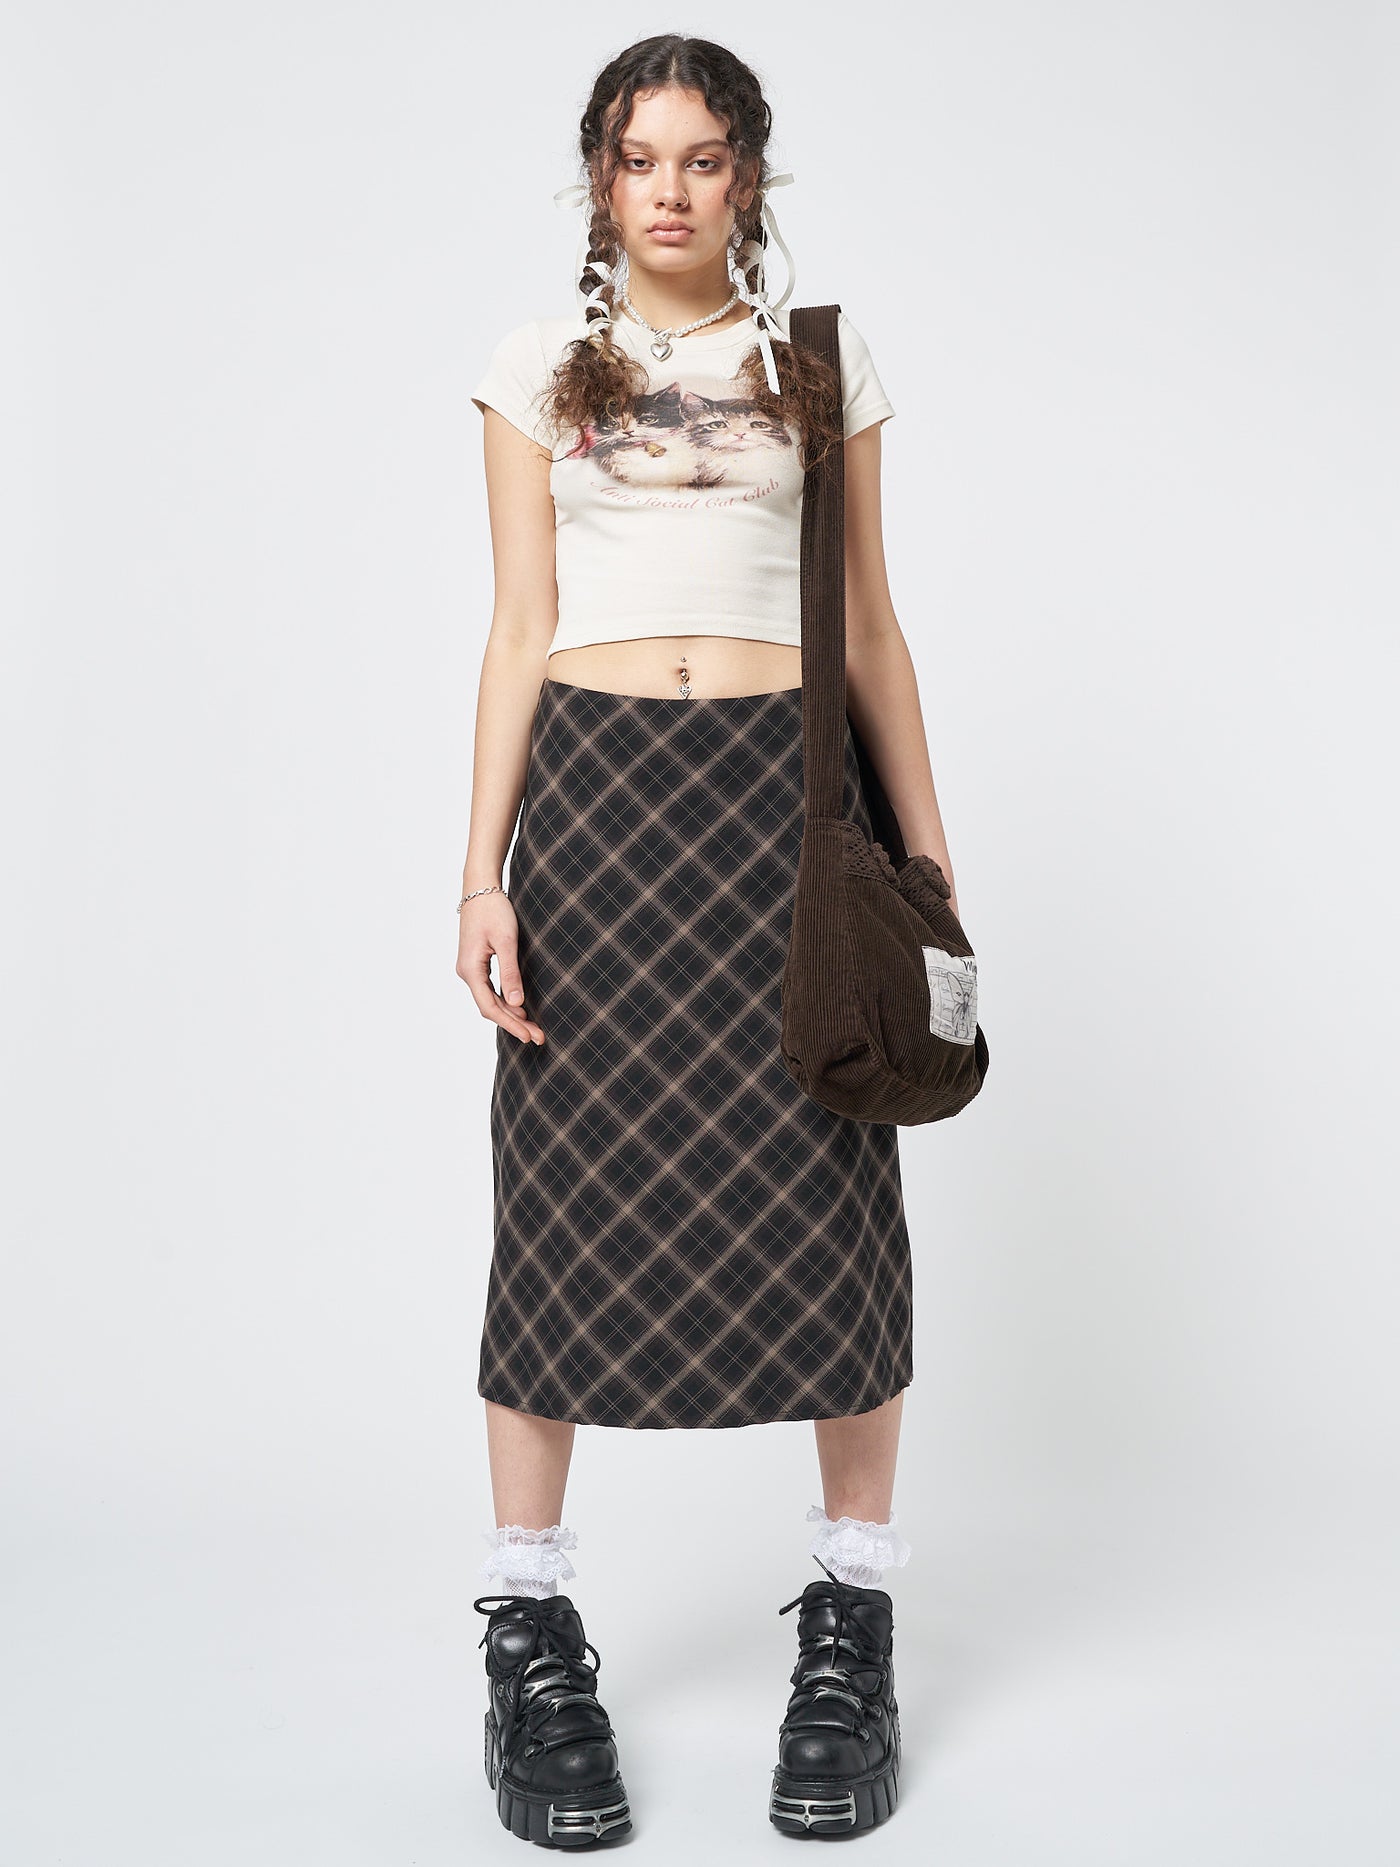 Embrace a timeless and sophisticated style with this midi skirt adorned in a classic plaid pattern.